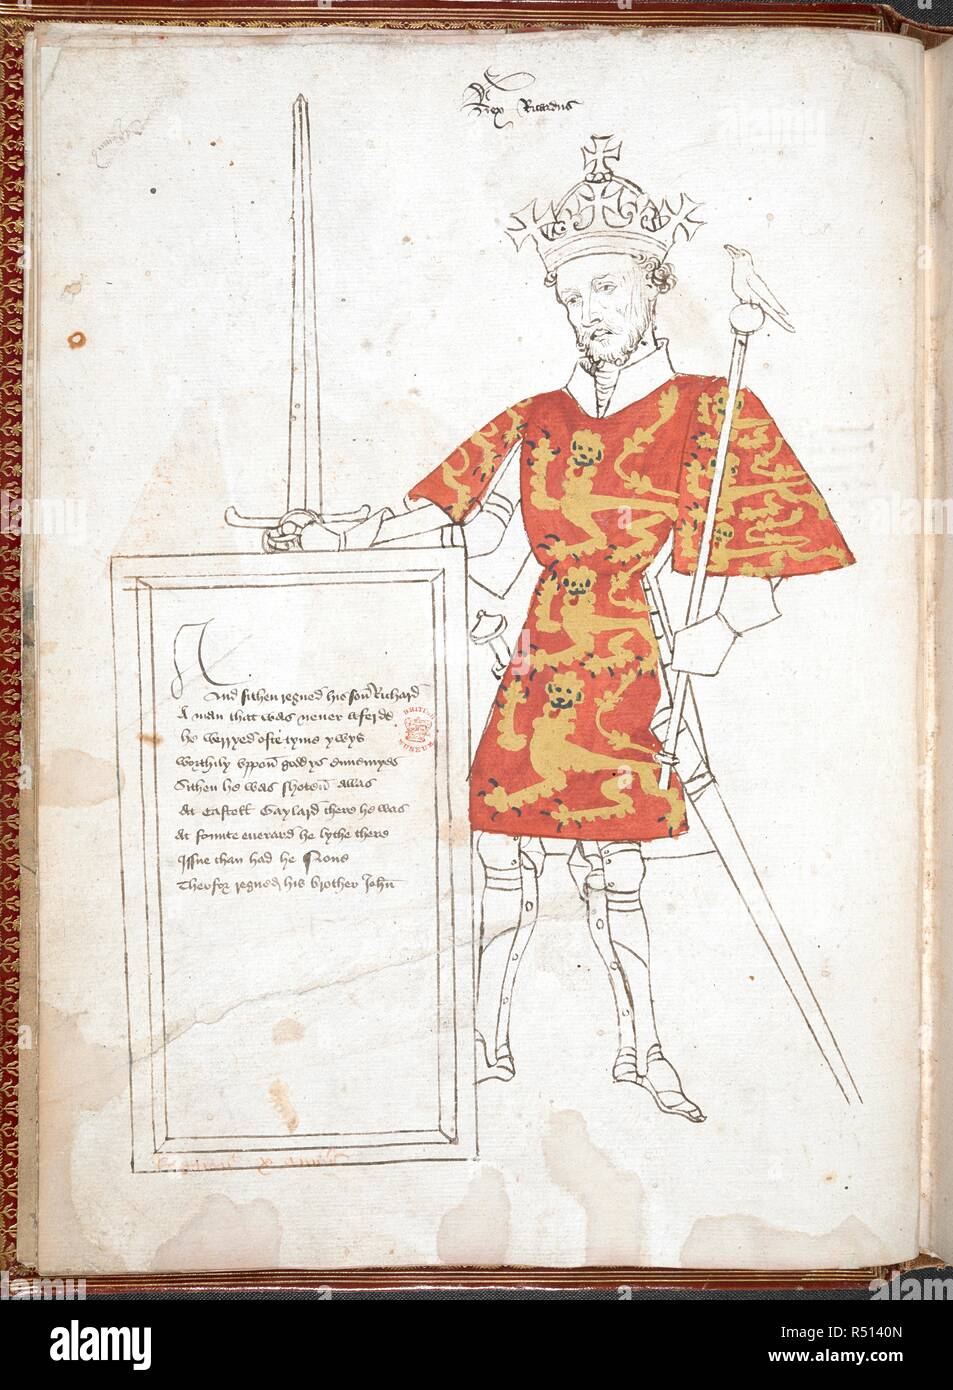 Coloured drawing of an English king in armour and tabard (Richard I), presenting a plaque with verses. Unfinished. Sir Thomas Holme's Book of Arms: anonymous verses on the kings of England ... (Part 1 folios 1 to 8). England, S. E. (probably London); c. 1445-c. 1450. Numerous coloured drawings of English kings in armour and tabard, presenting a plaque with verses. Source: Harley 4205 f.3v. Language: English. Gothic cursive. Stock Photo